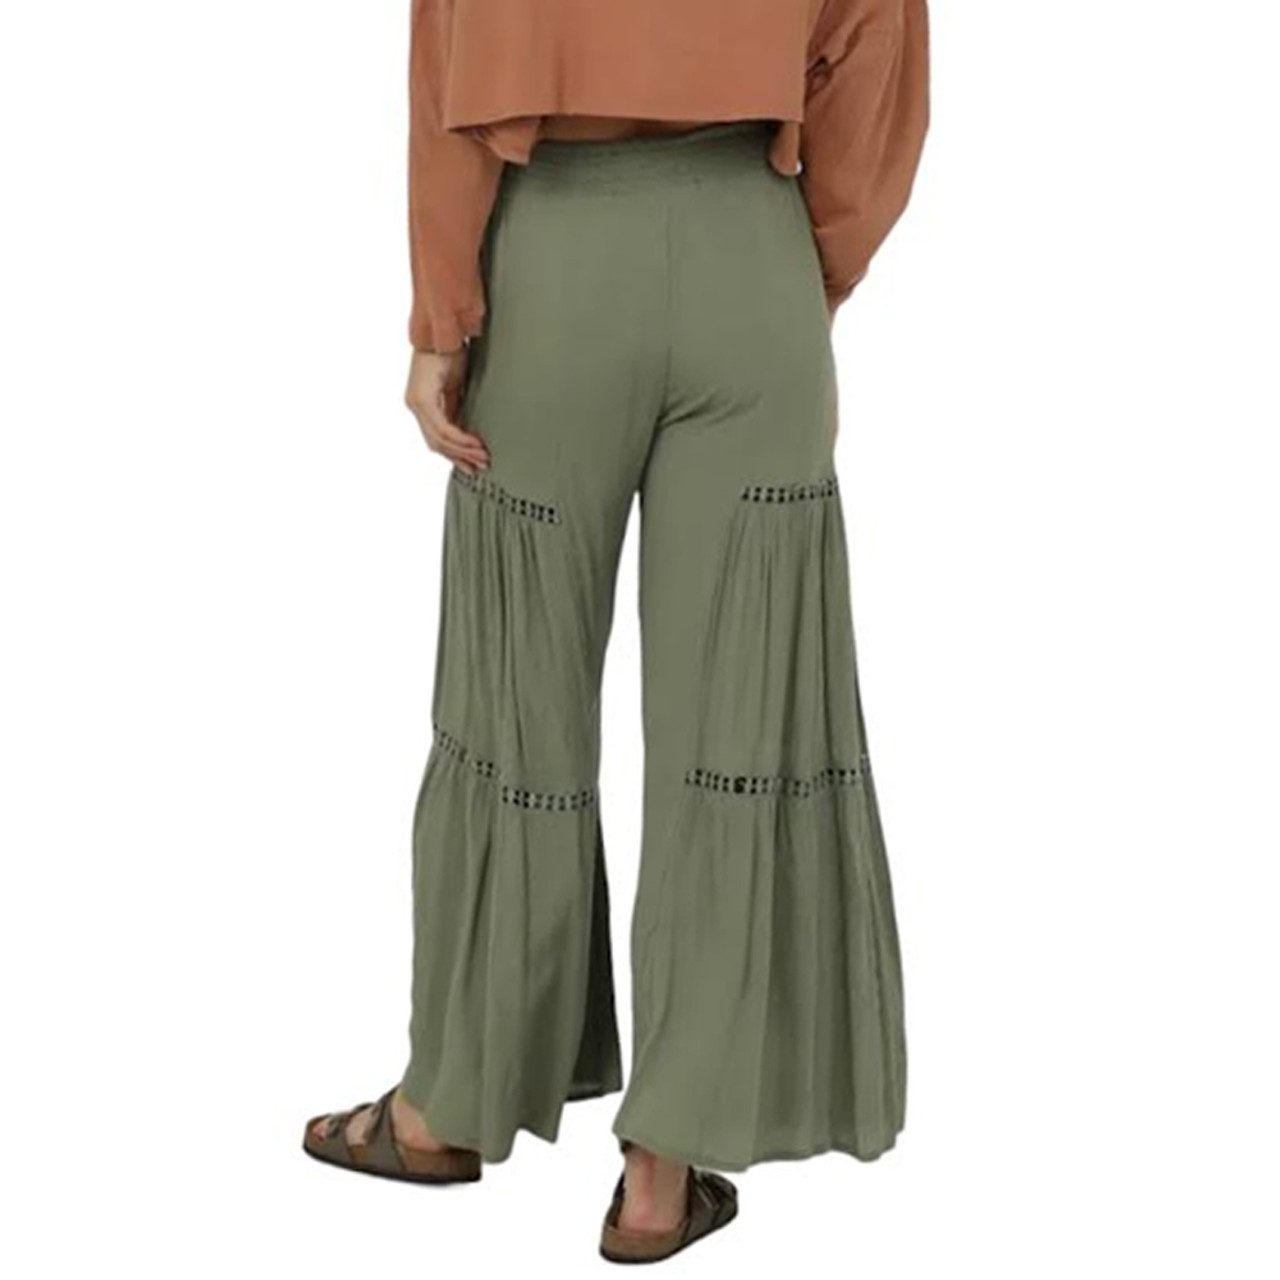 Angie Wide Leg Pants with Lace Inserts Olive Green